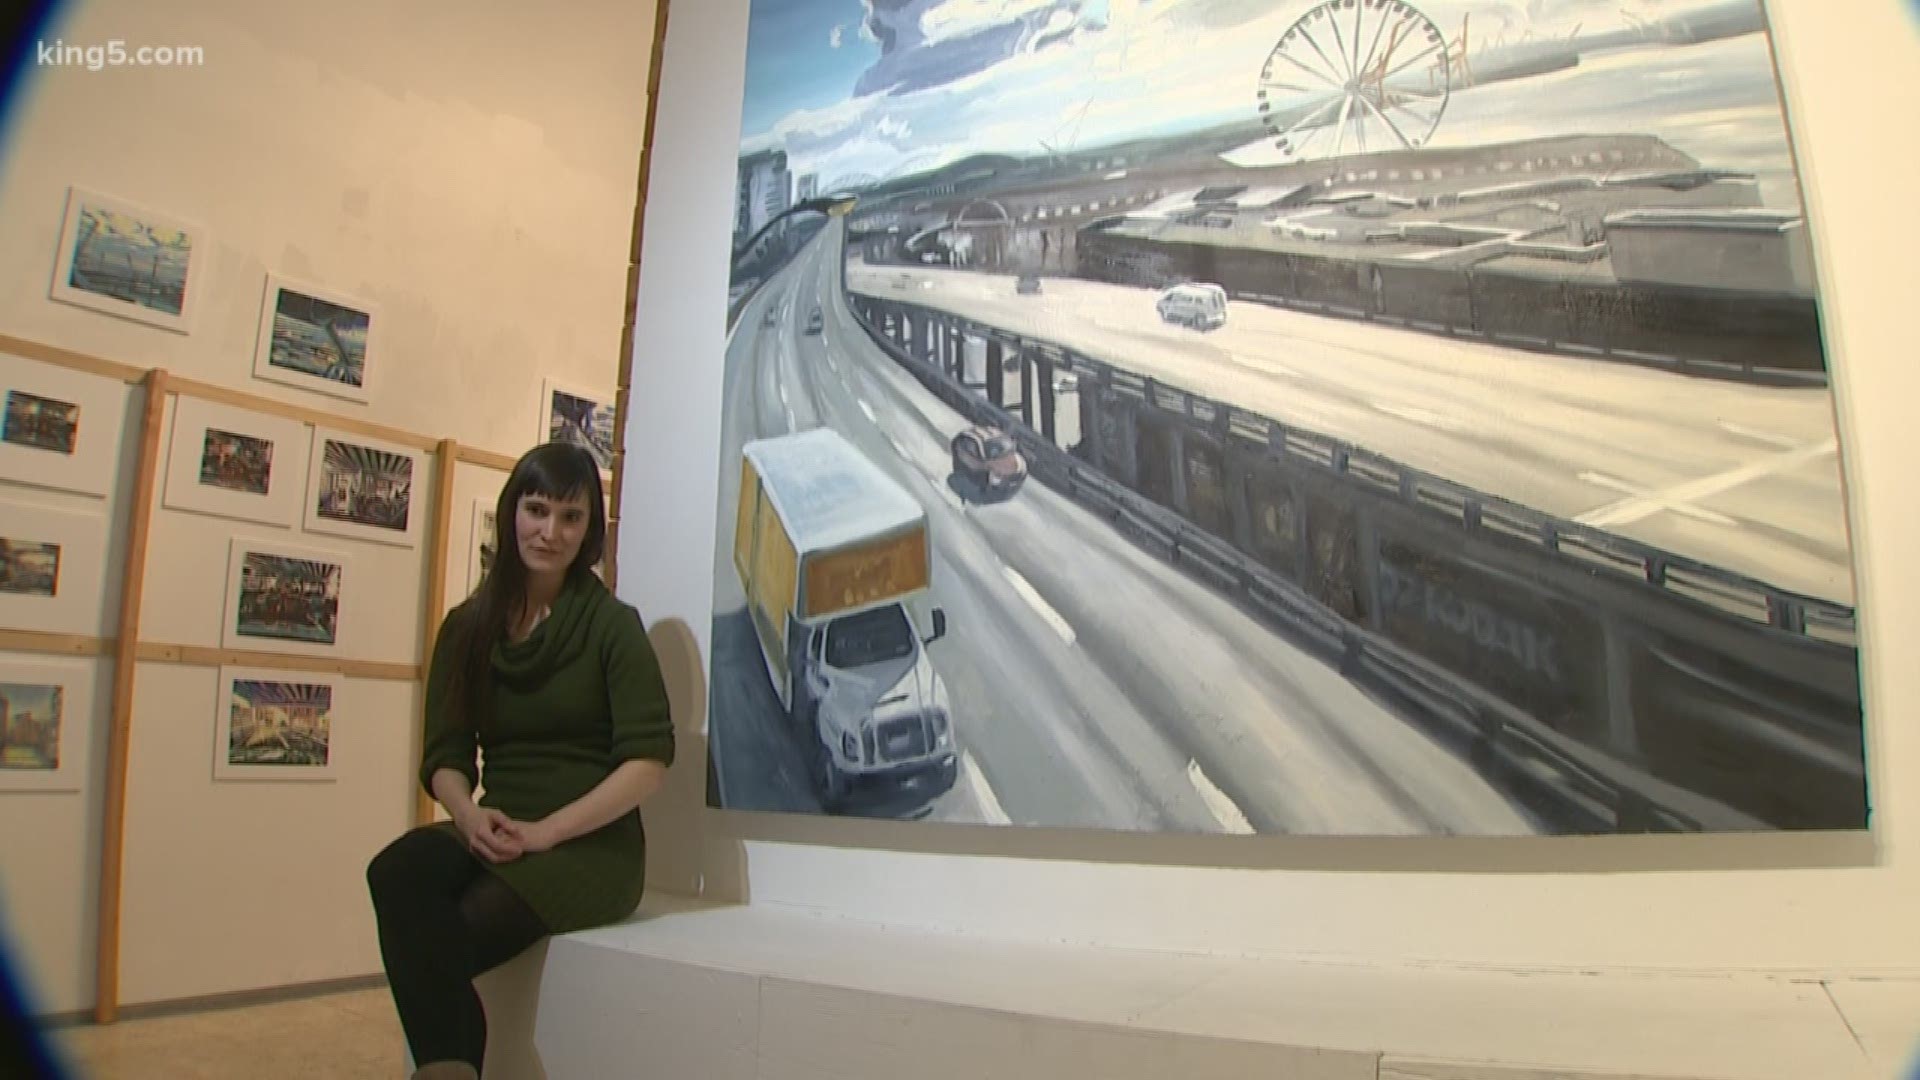 A new exhibit is giving you a look at the Viaduct like you've never seen before.